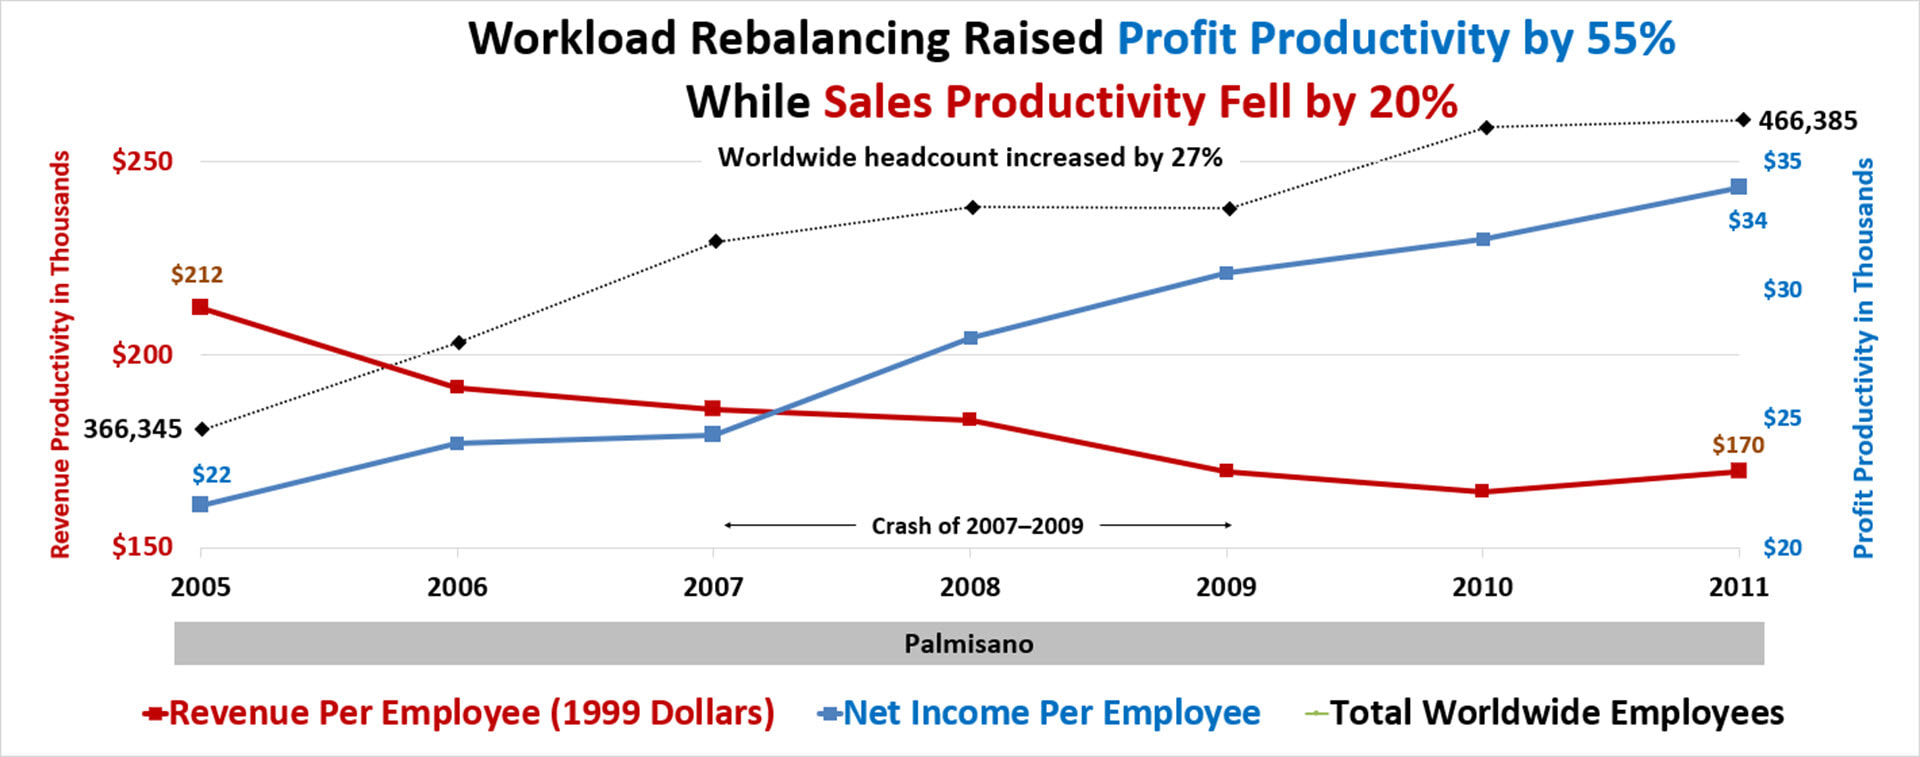 IBM Net Income per Employee (Profit Productivity) compared to Revenue per Employee (Sales Productivity) from 2005 to 2011 to document the impact of workforce rebalancing.